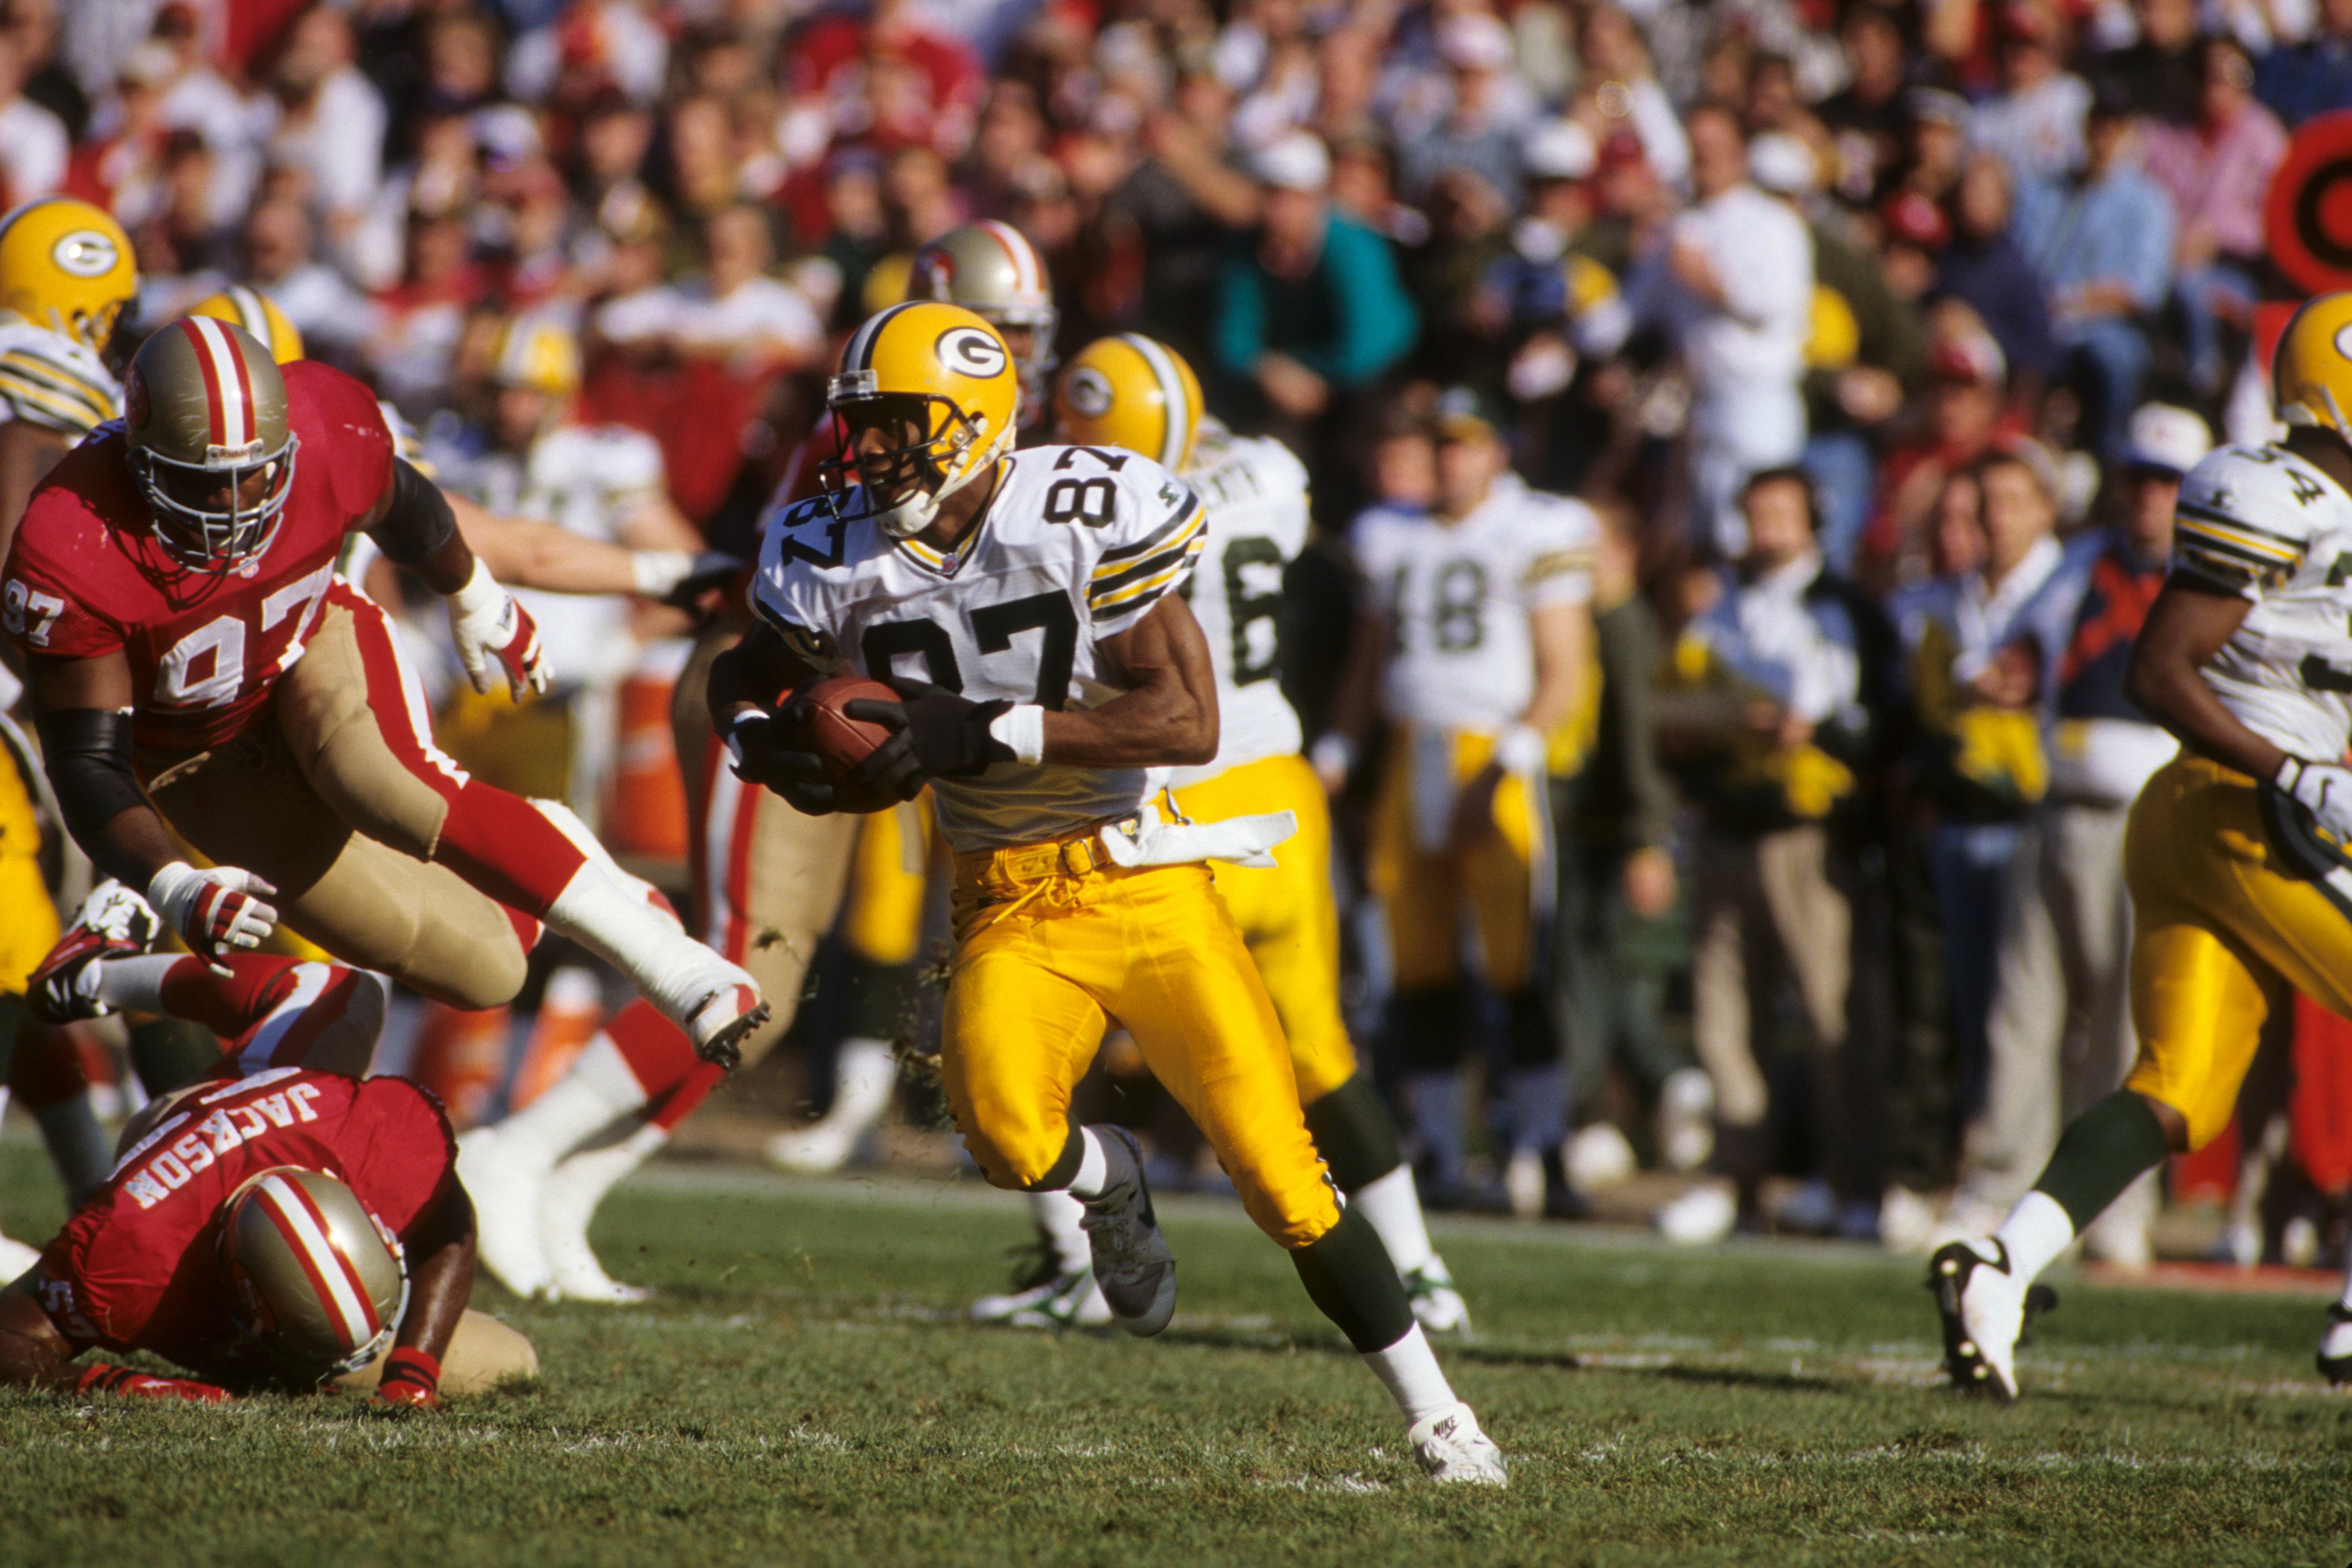 SAN FRANCISCO, CA - JANUARY 6:  Wide receiver Robert Brooks #87 of the Green Bay Packers runs with the ball during a NFC divisional playoff game against the San Francisco 49ers at Candlestick Park on January 6, 1996 in San Francisco, California.  The Pack